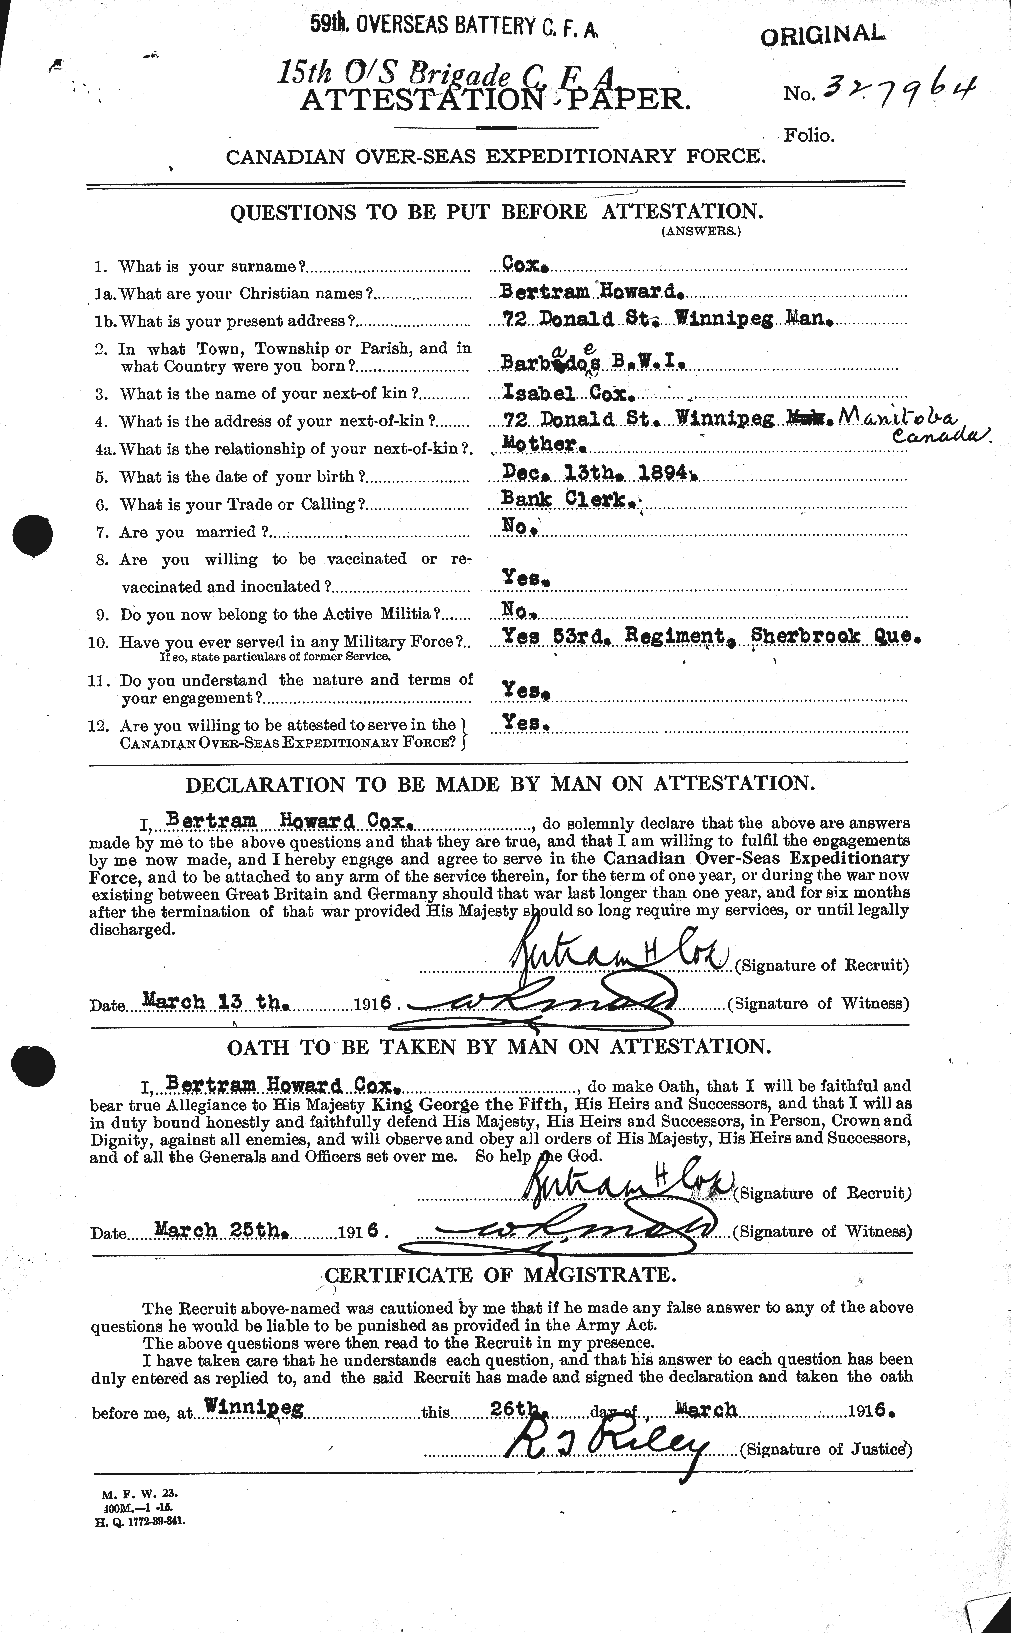 Personnel Records of the First World War - CEF 061100a